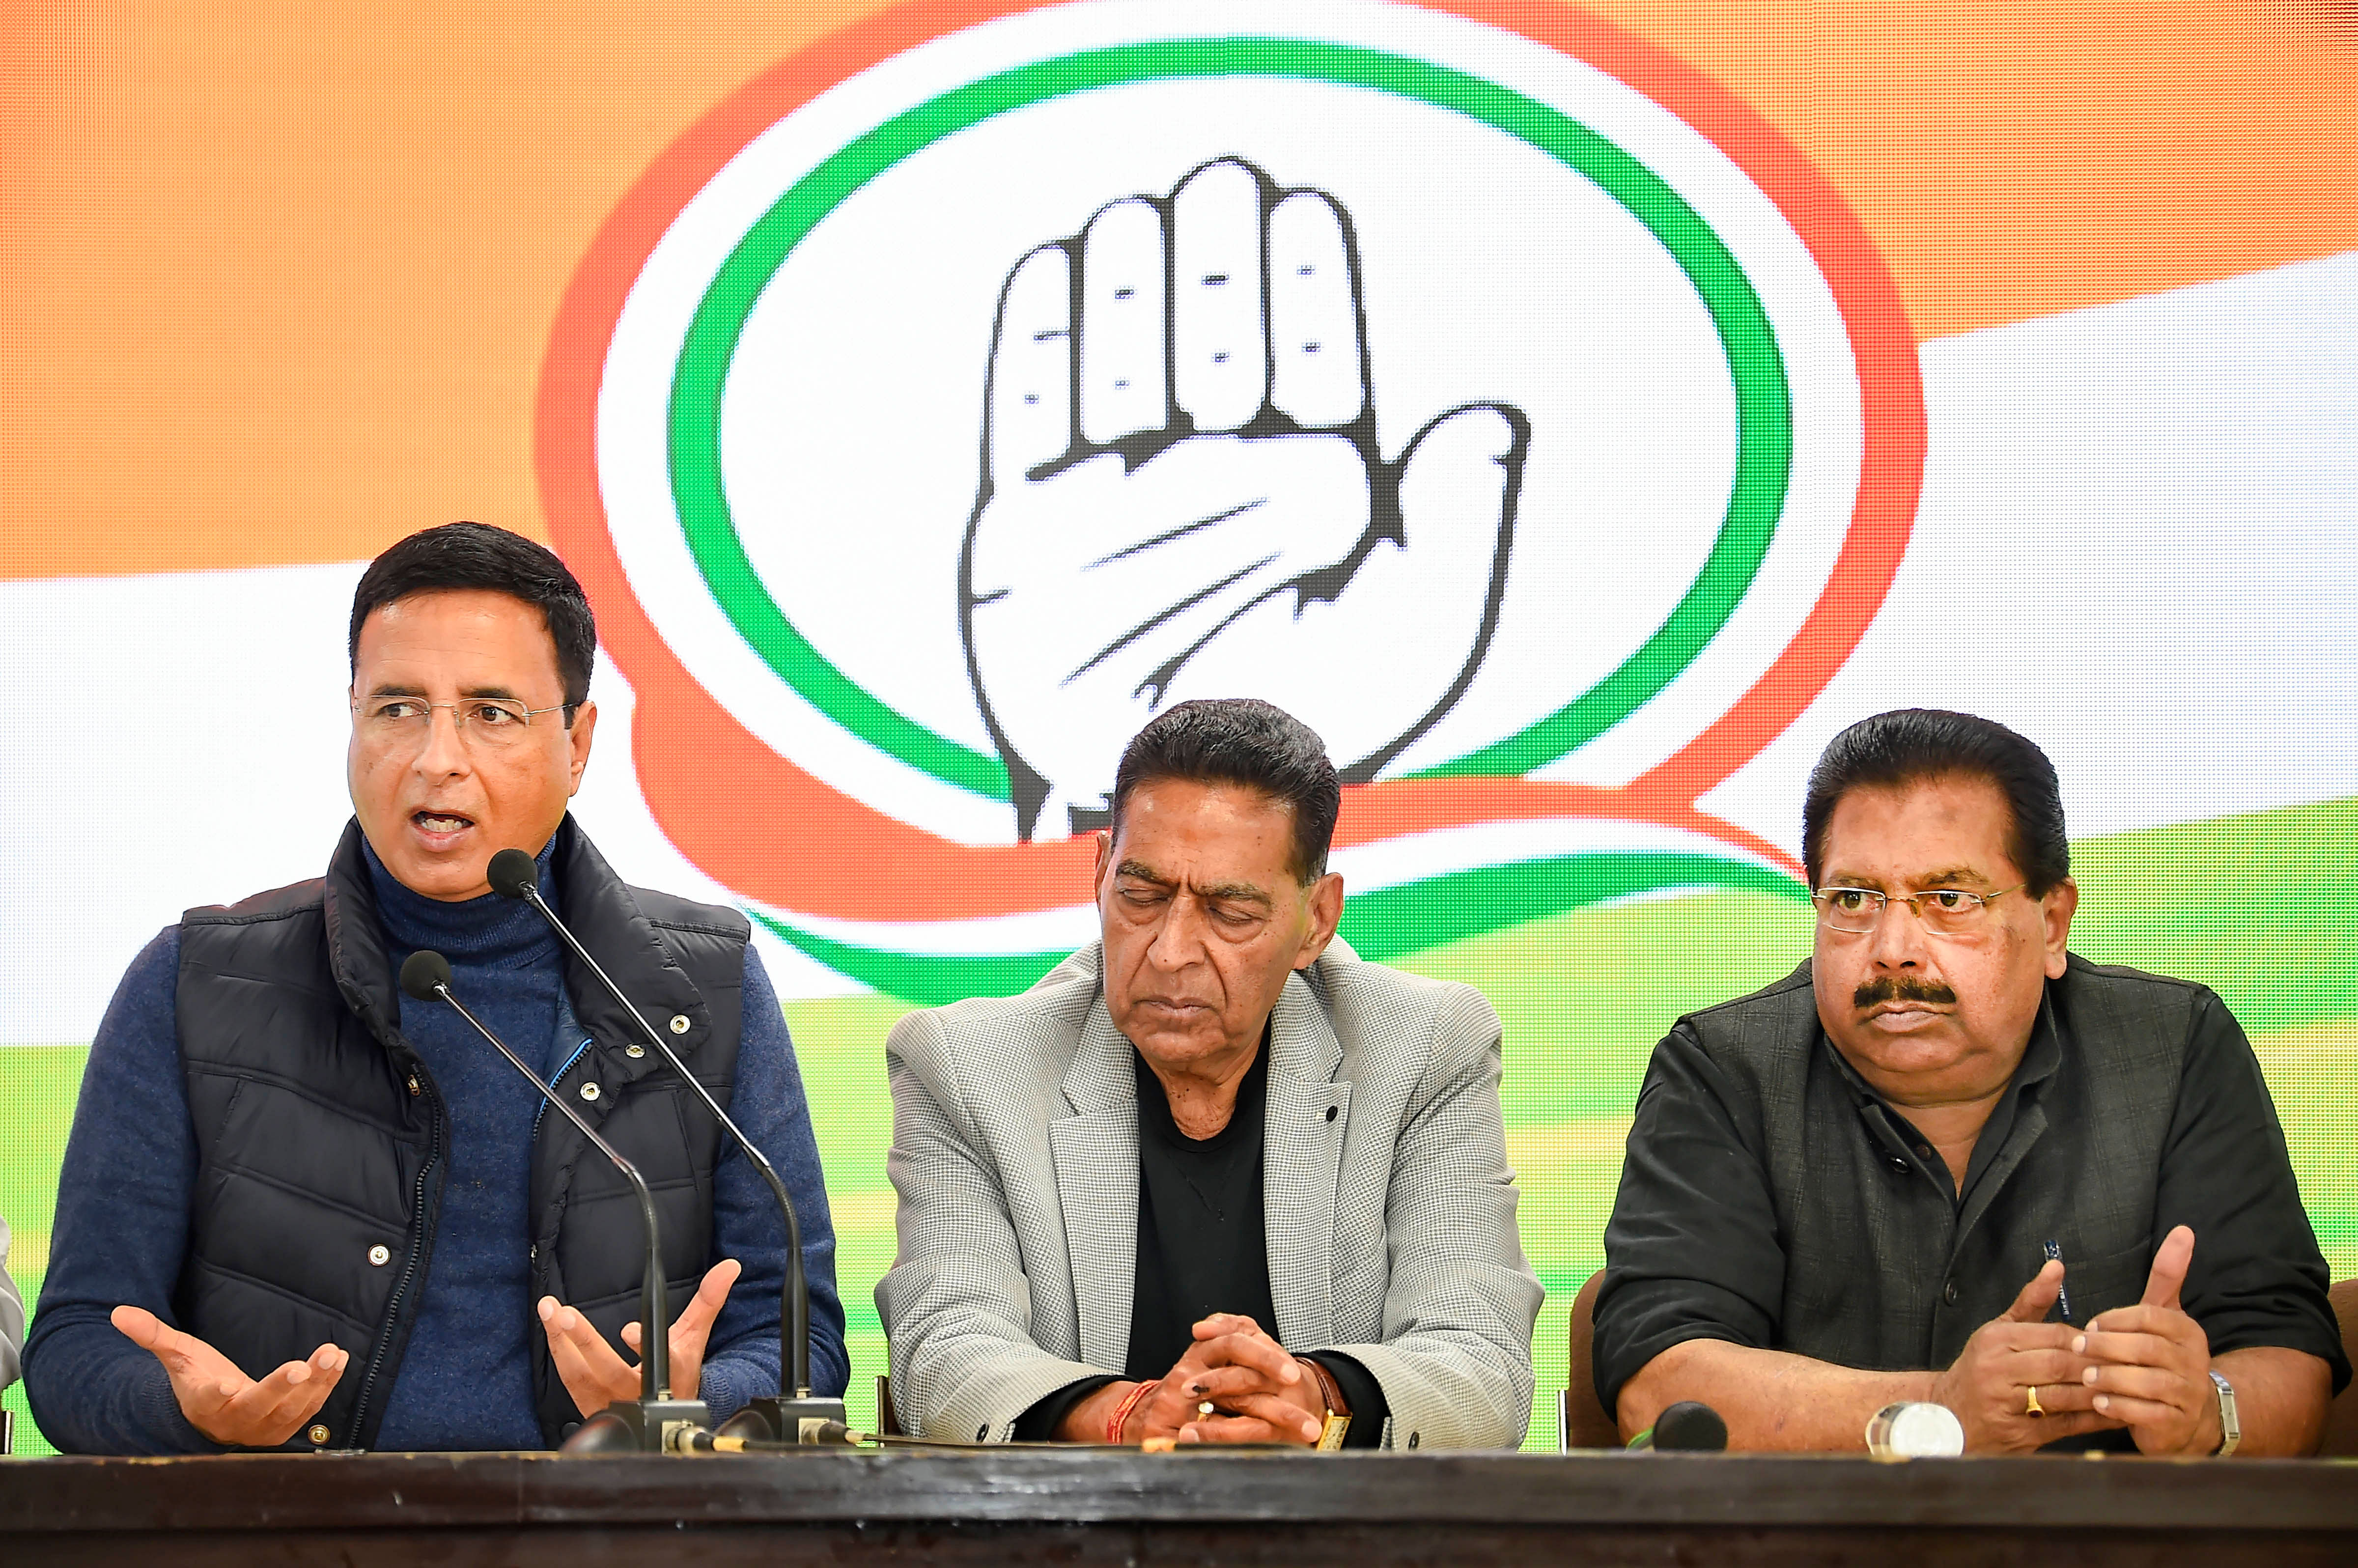 Congress spokesperson Randeep Singh Surjewala (L) addresses a press conference during the counting of votes for Delhi Assembly polls, in New Delhi, Tuesday, Feb. 11, 2020. Delhi Congress Chief Subhash Chopra (C) and Delhi Congress in-charge PC Chacko (R). (PTI Photo)